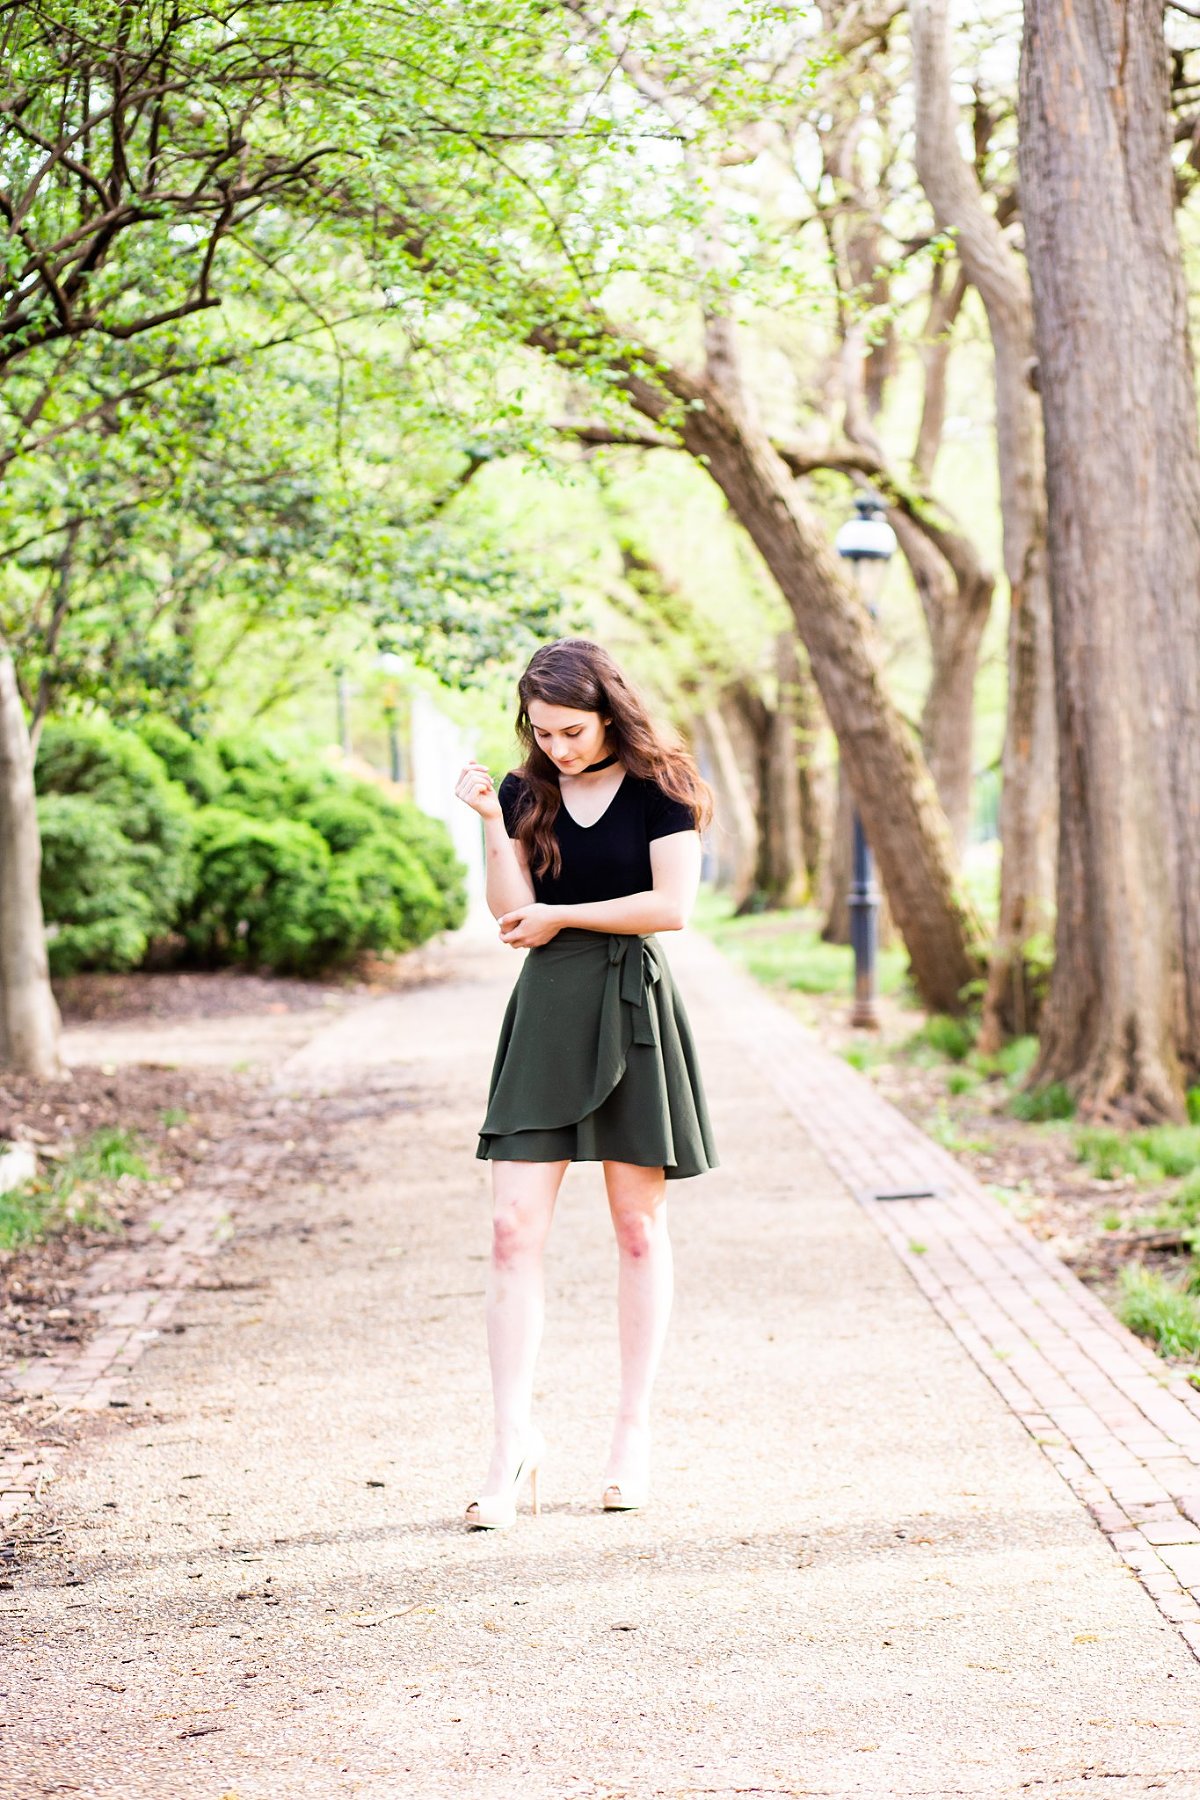 Senior session with Bethanie Vetter Photography. Bethanie is an AMAZING senior and wedding photography who loves to capture the candid laughter and movement based photos. She is amazing to work with!!! Highly recommend!